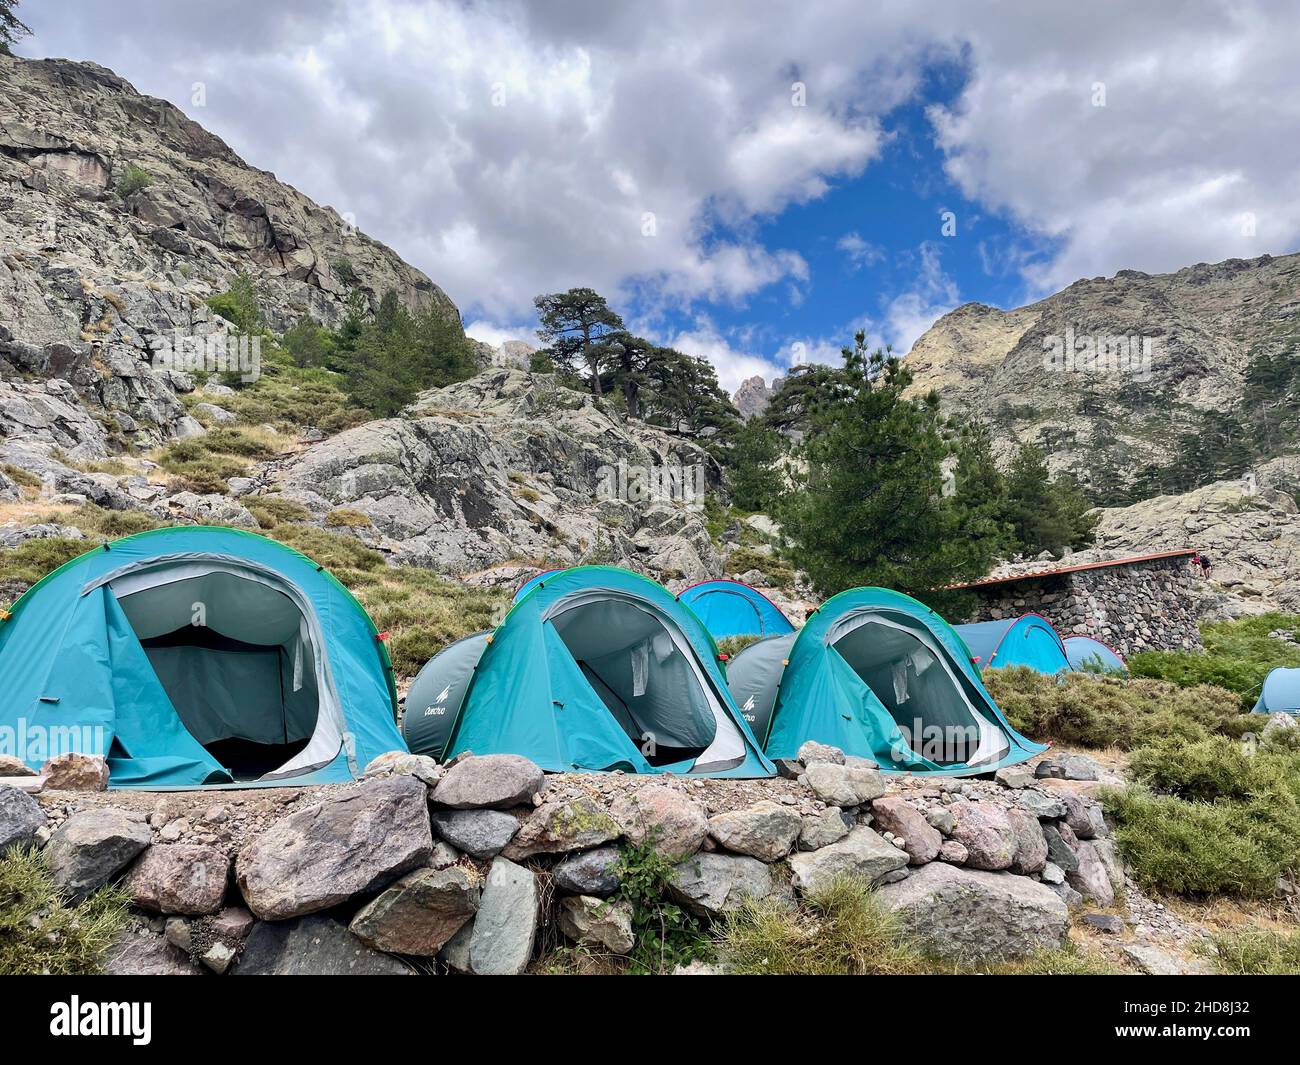 Wetland riem Ontslag nemen Biwak tents at Bergerie de Ballone, along the GR 20 trail. Outdoor camping  in the mountains of Corsica, France Stock Photo - Alamy